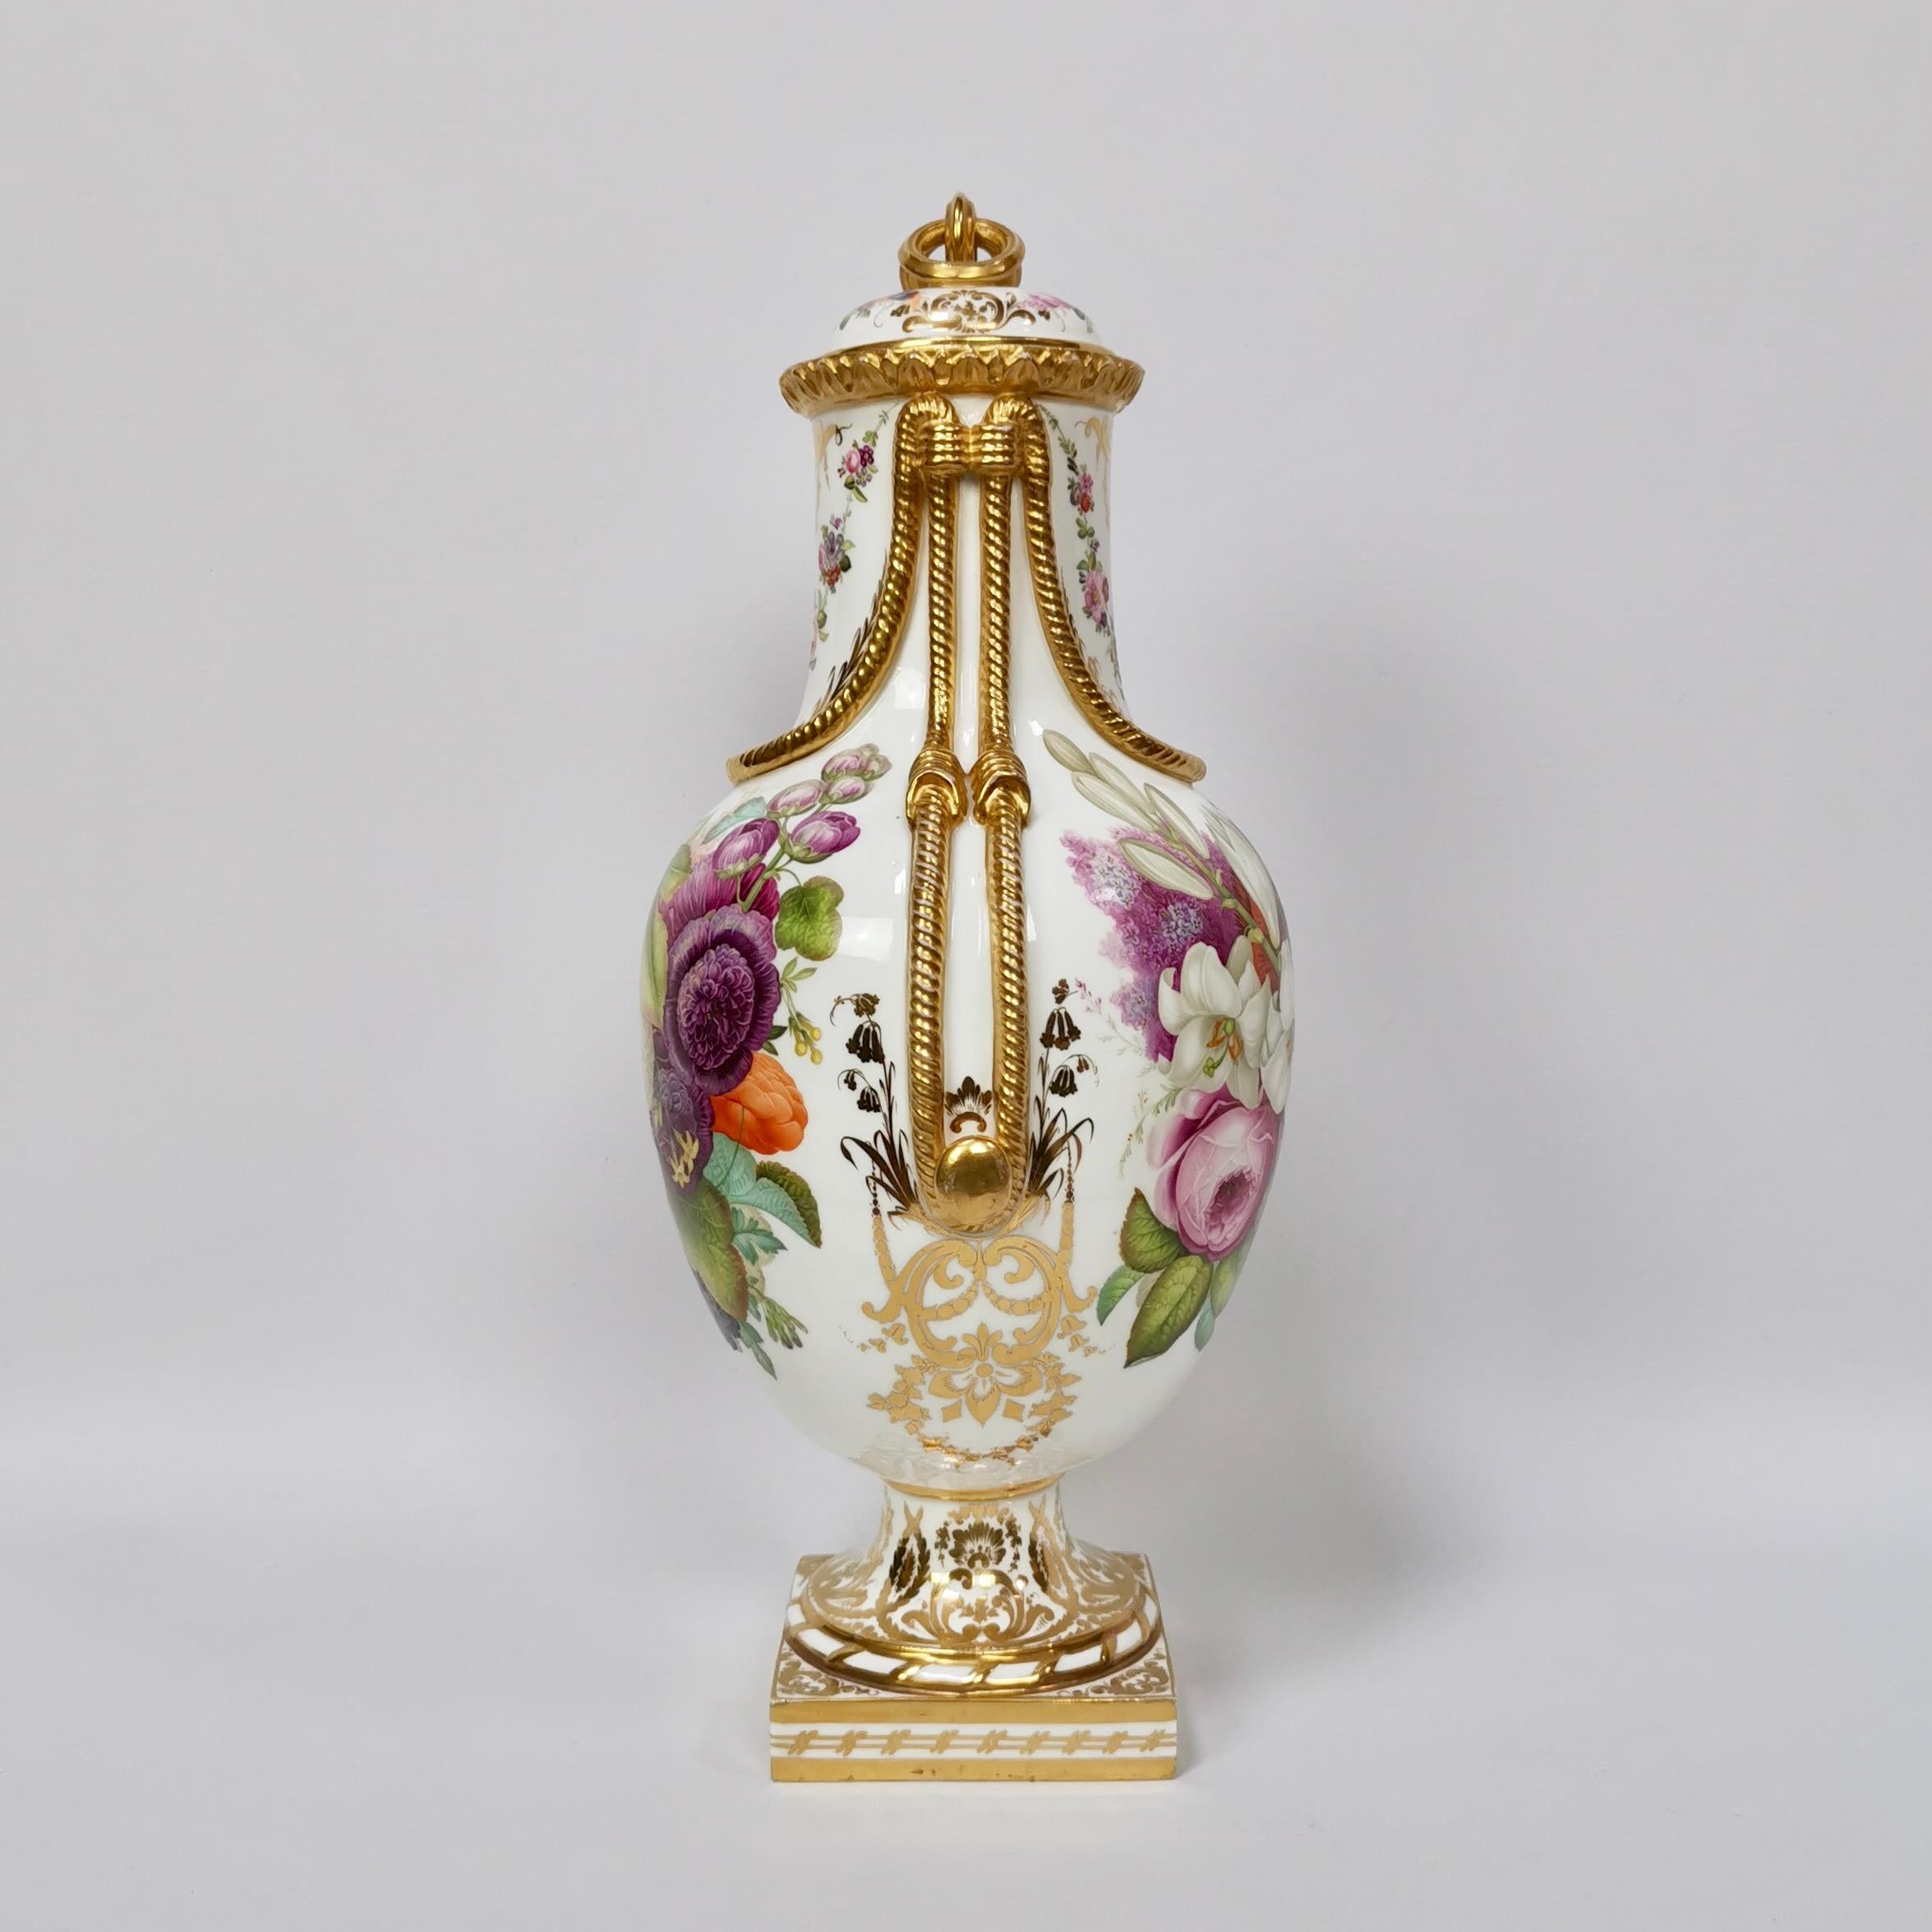 This is a stunning vase with cover made by Coalport between 1851 and 1861. The vase has beautiful gilt rope details and sublimely hand painted flowers by the famous painter William Cooke.

Coalport was one of the leading potters in 19th and 20th